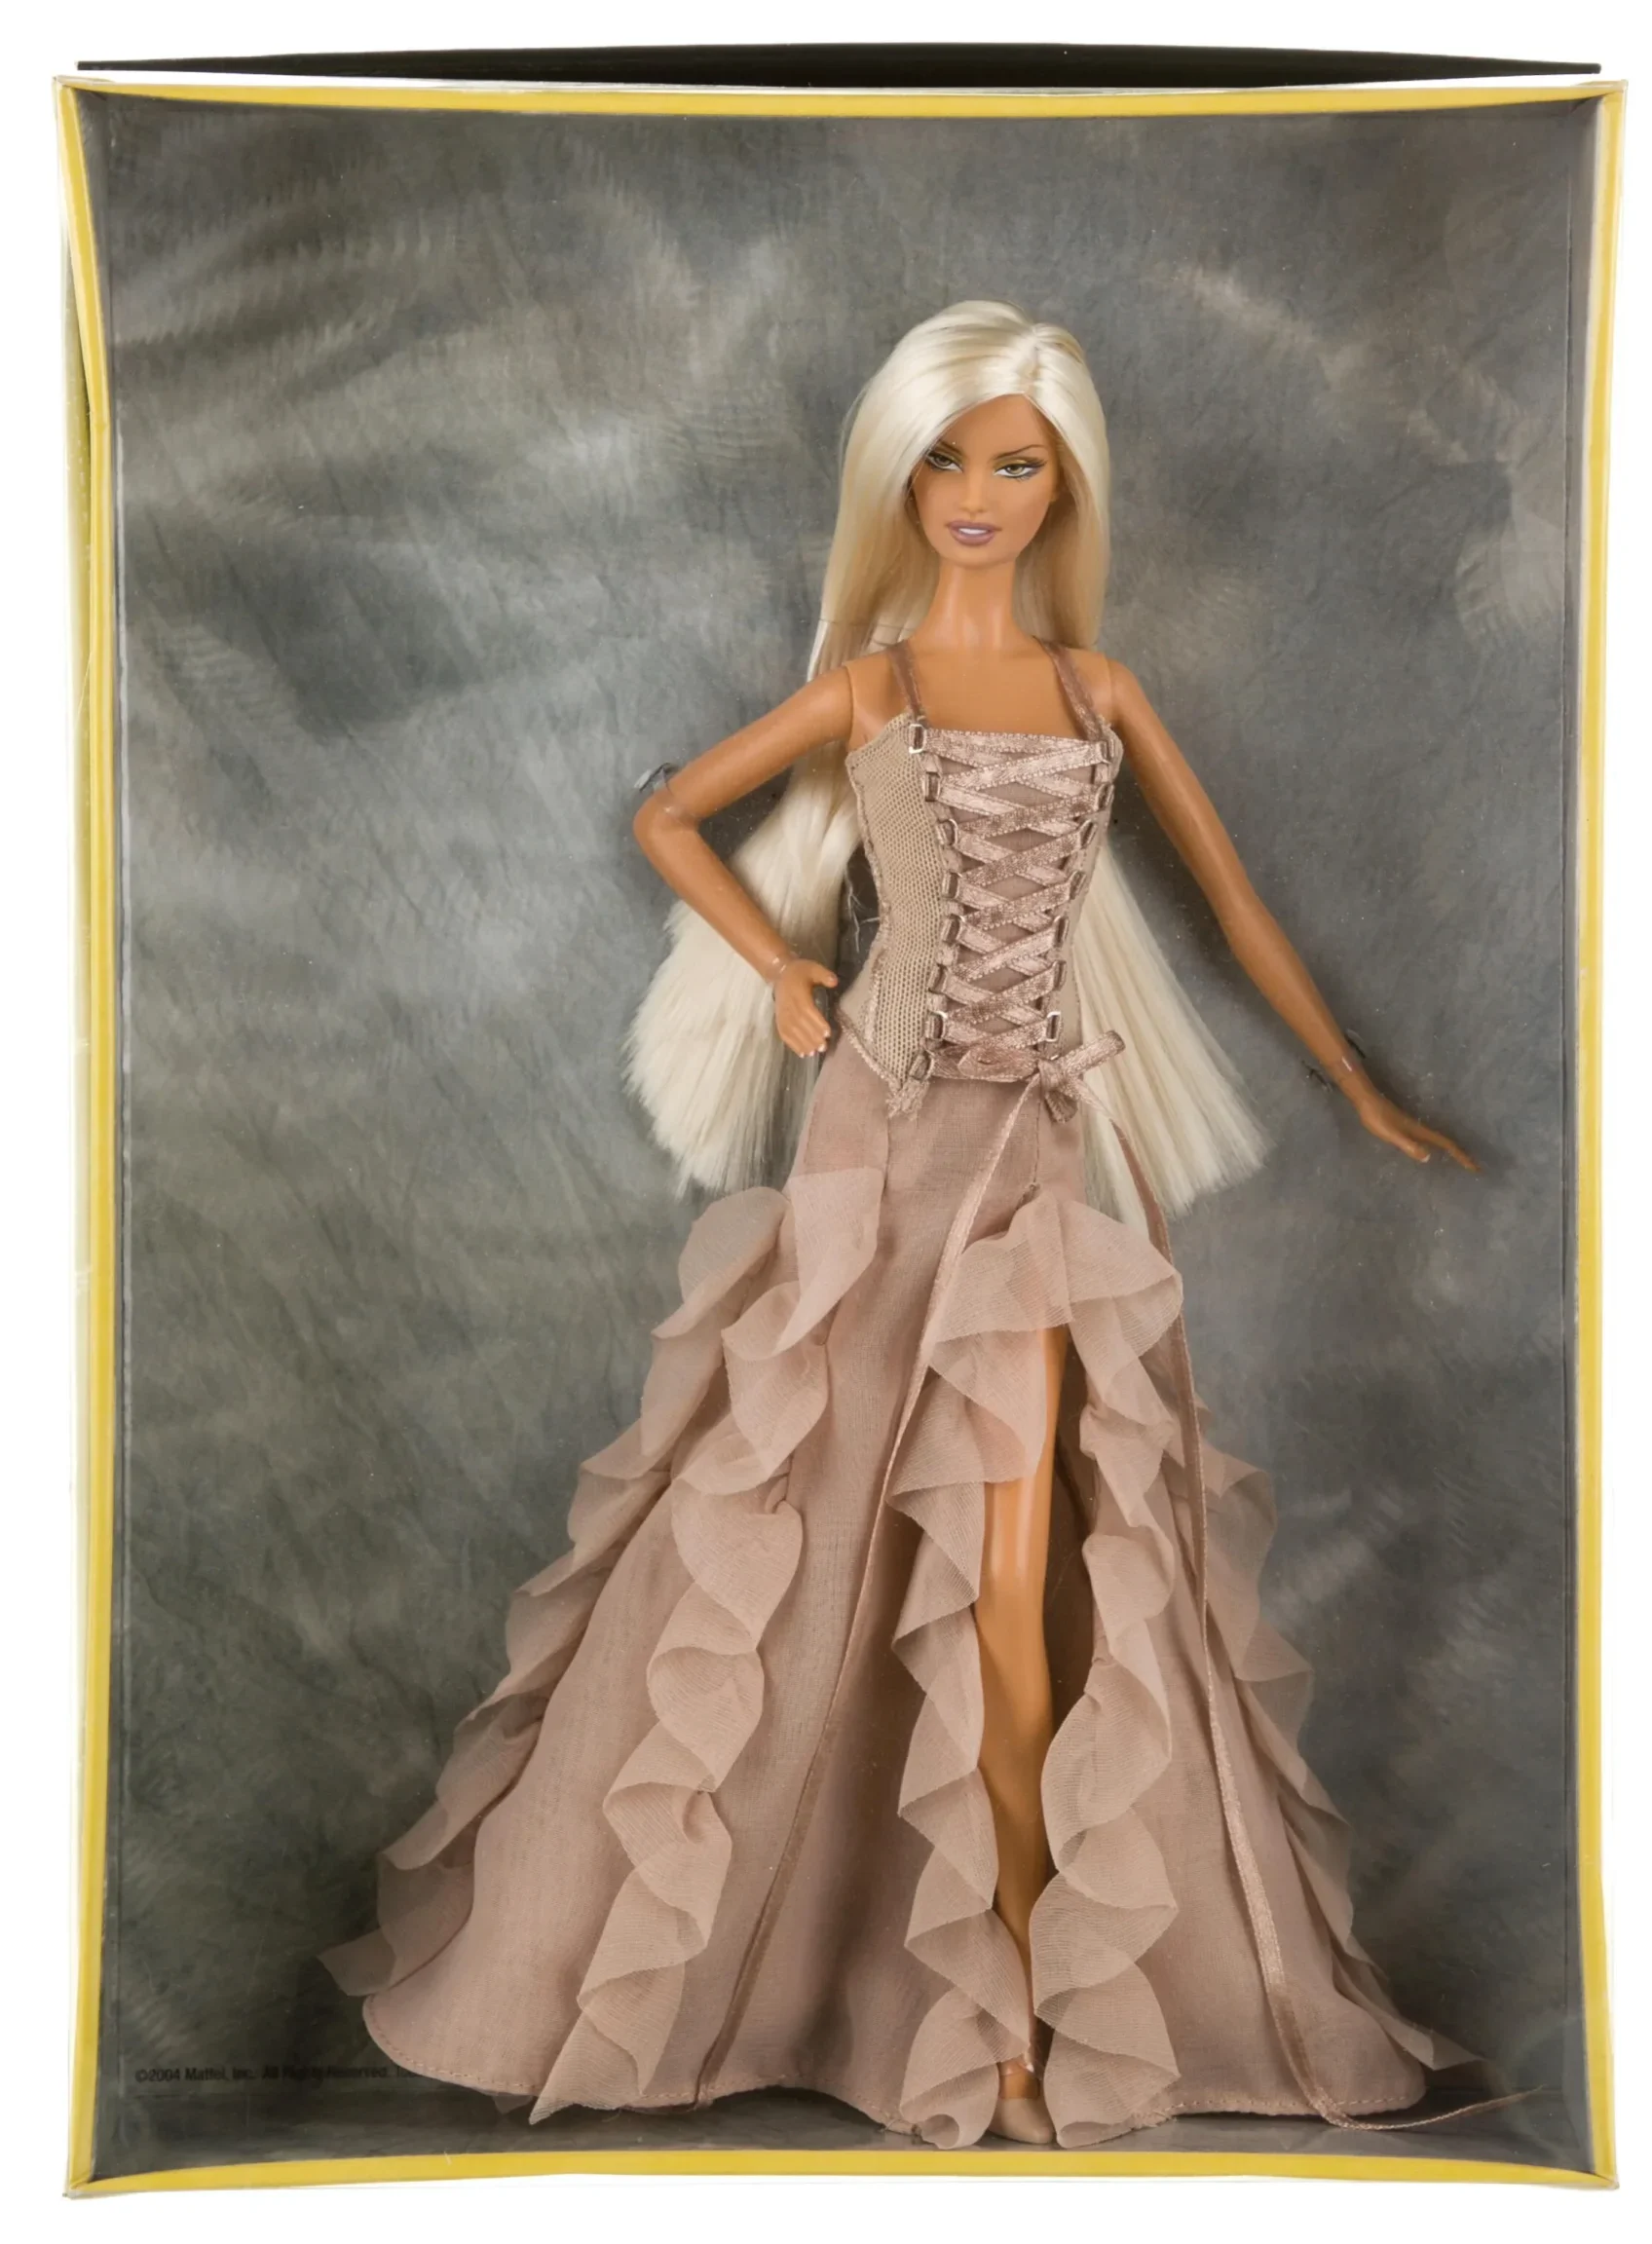 https://www.therealreal.com/products/home/decor-and-accessories/decorative-accents/versace-gold-label-barbie-doll-8728q